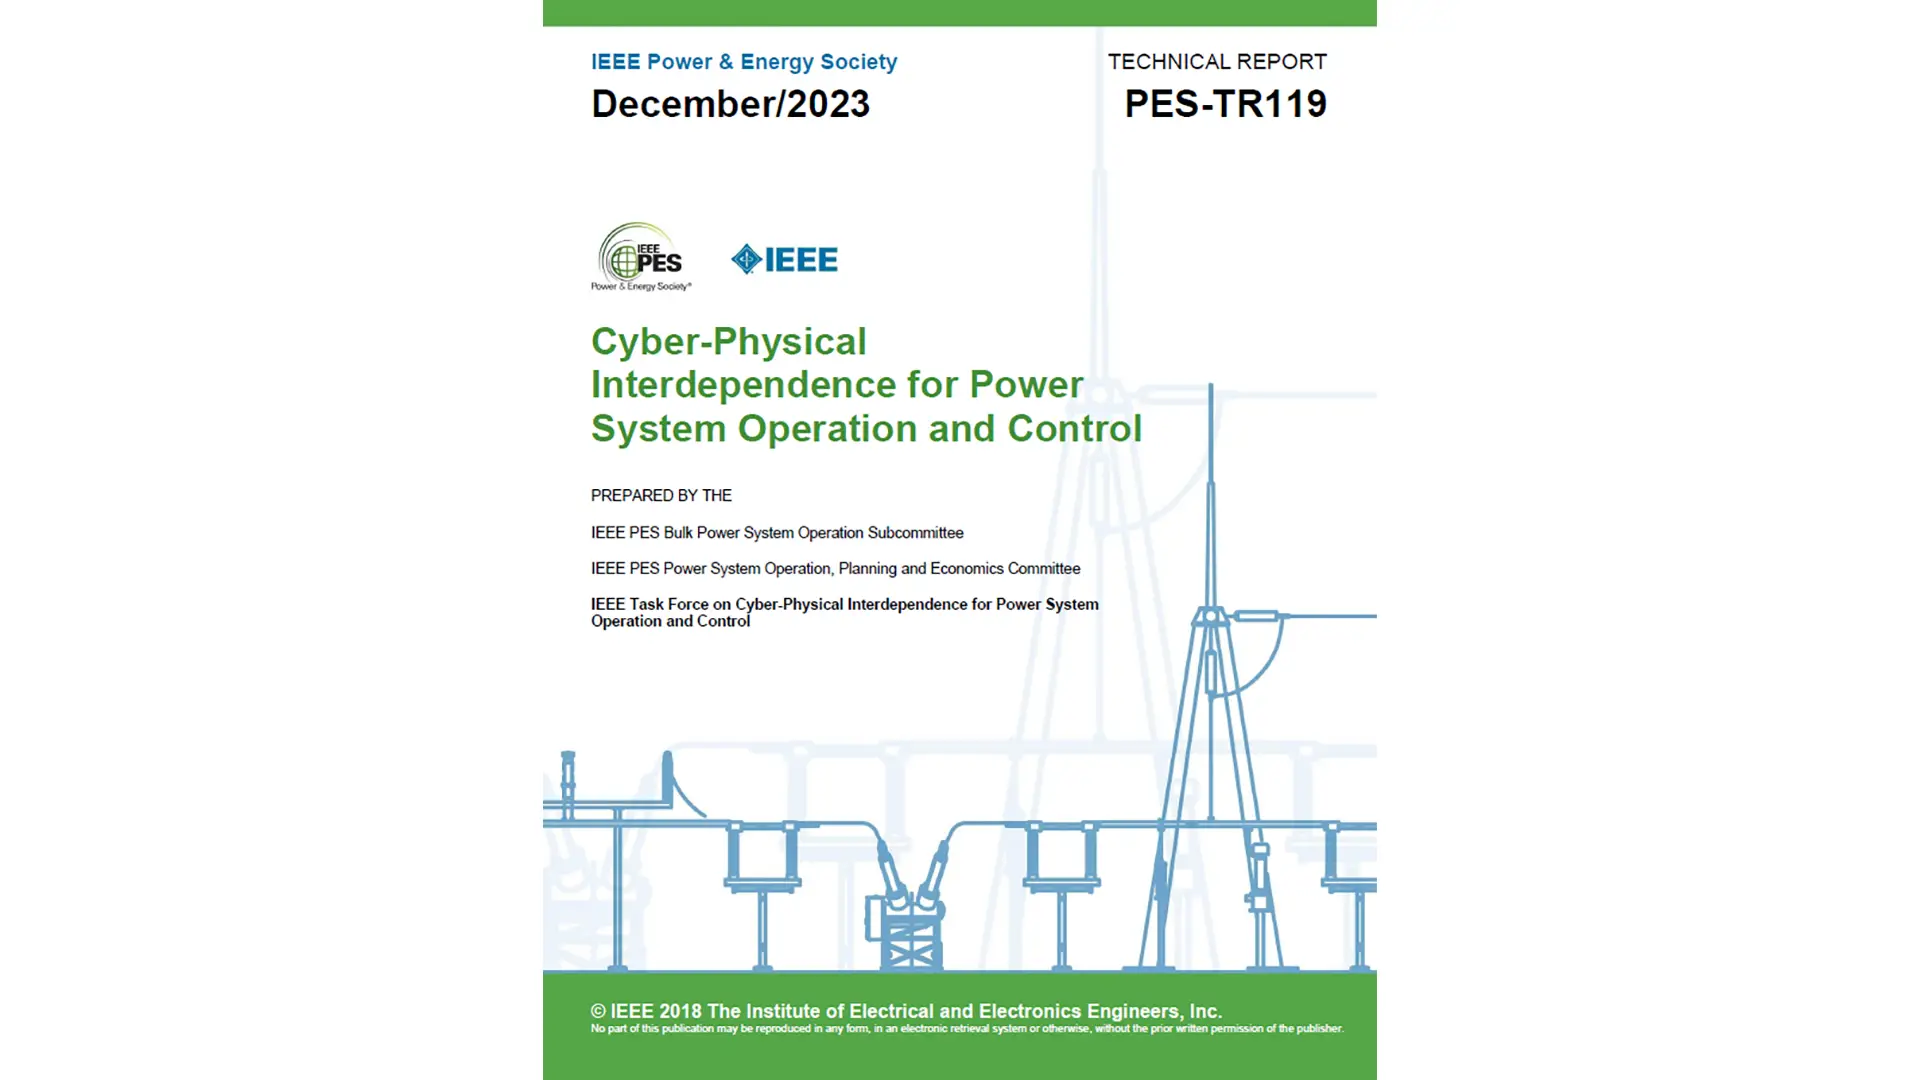 Cyber-Physical Interdependence for Power System Operation and Control (TR119)